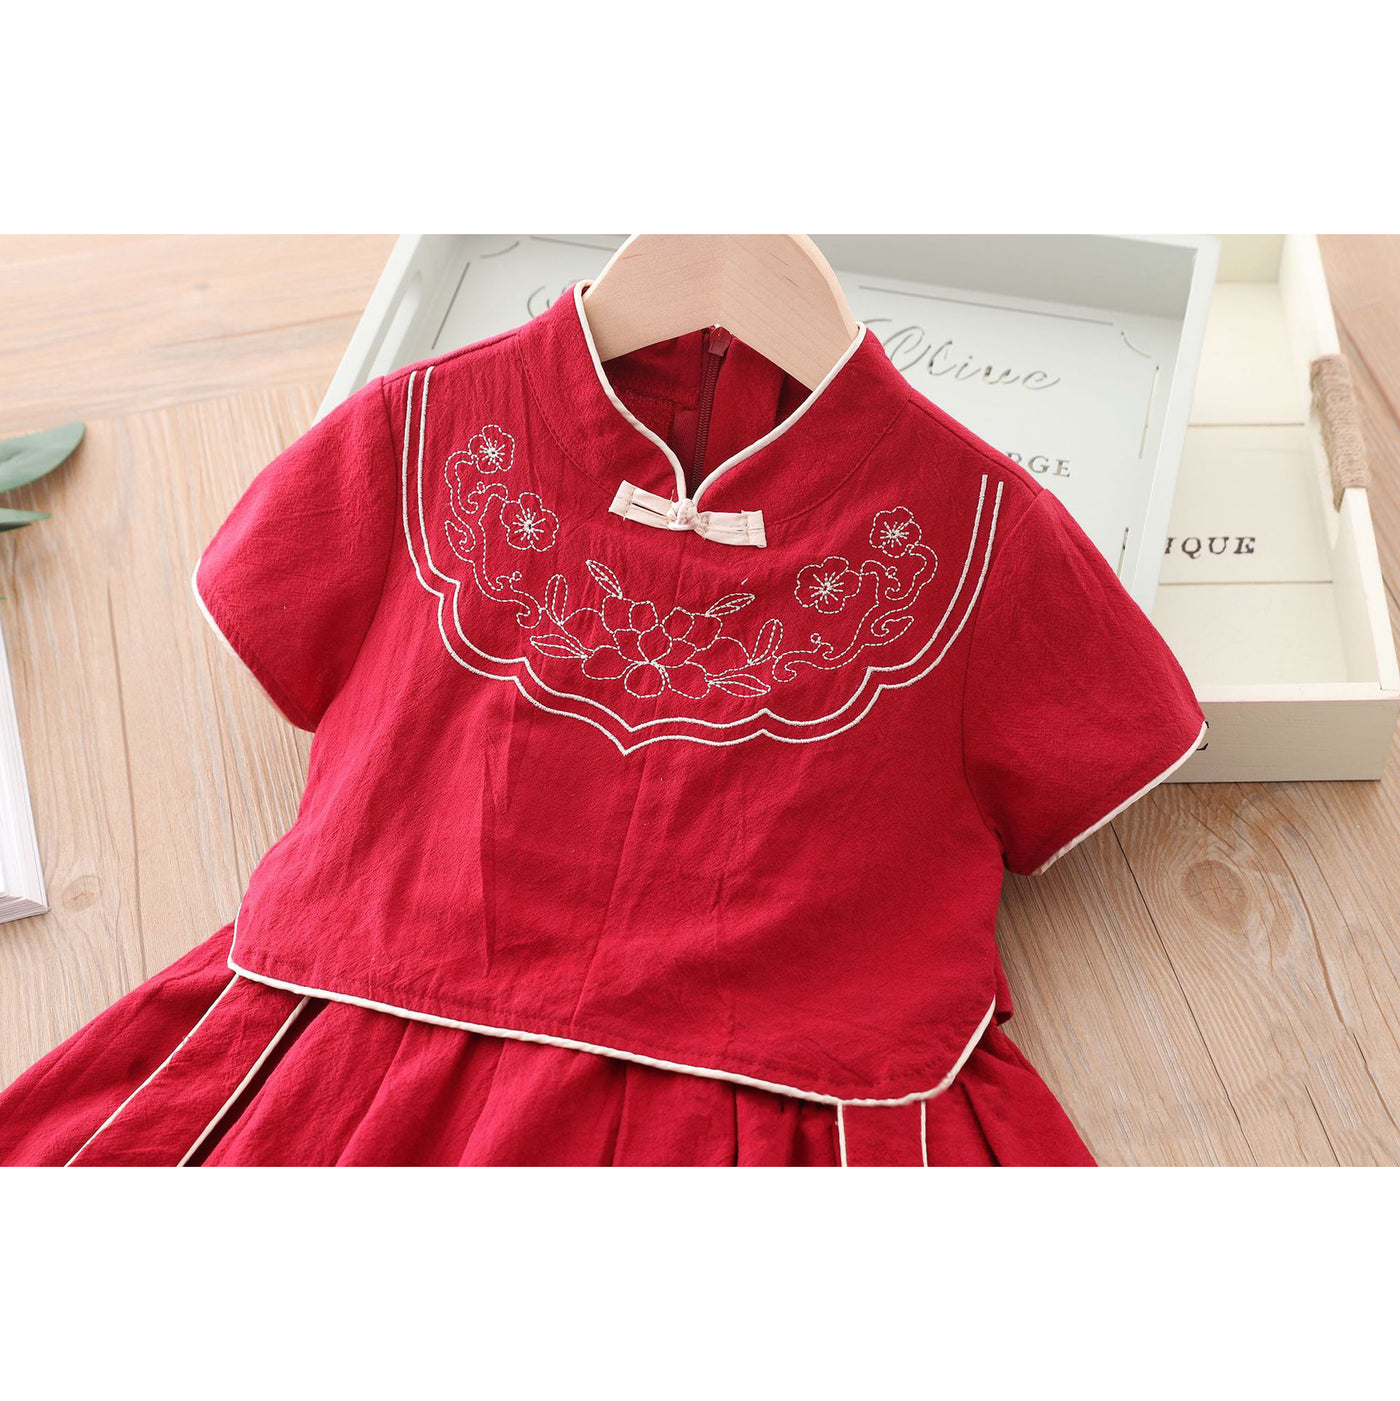 [KG13] Kids Girls Fake Two Piece Cheongsam Dress w Embroidered Lotus Flowers CNY Chinese New Year Outfit - Little Kooma